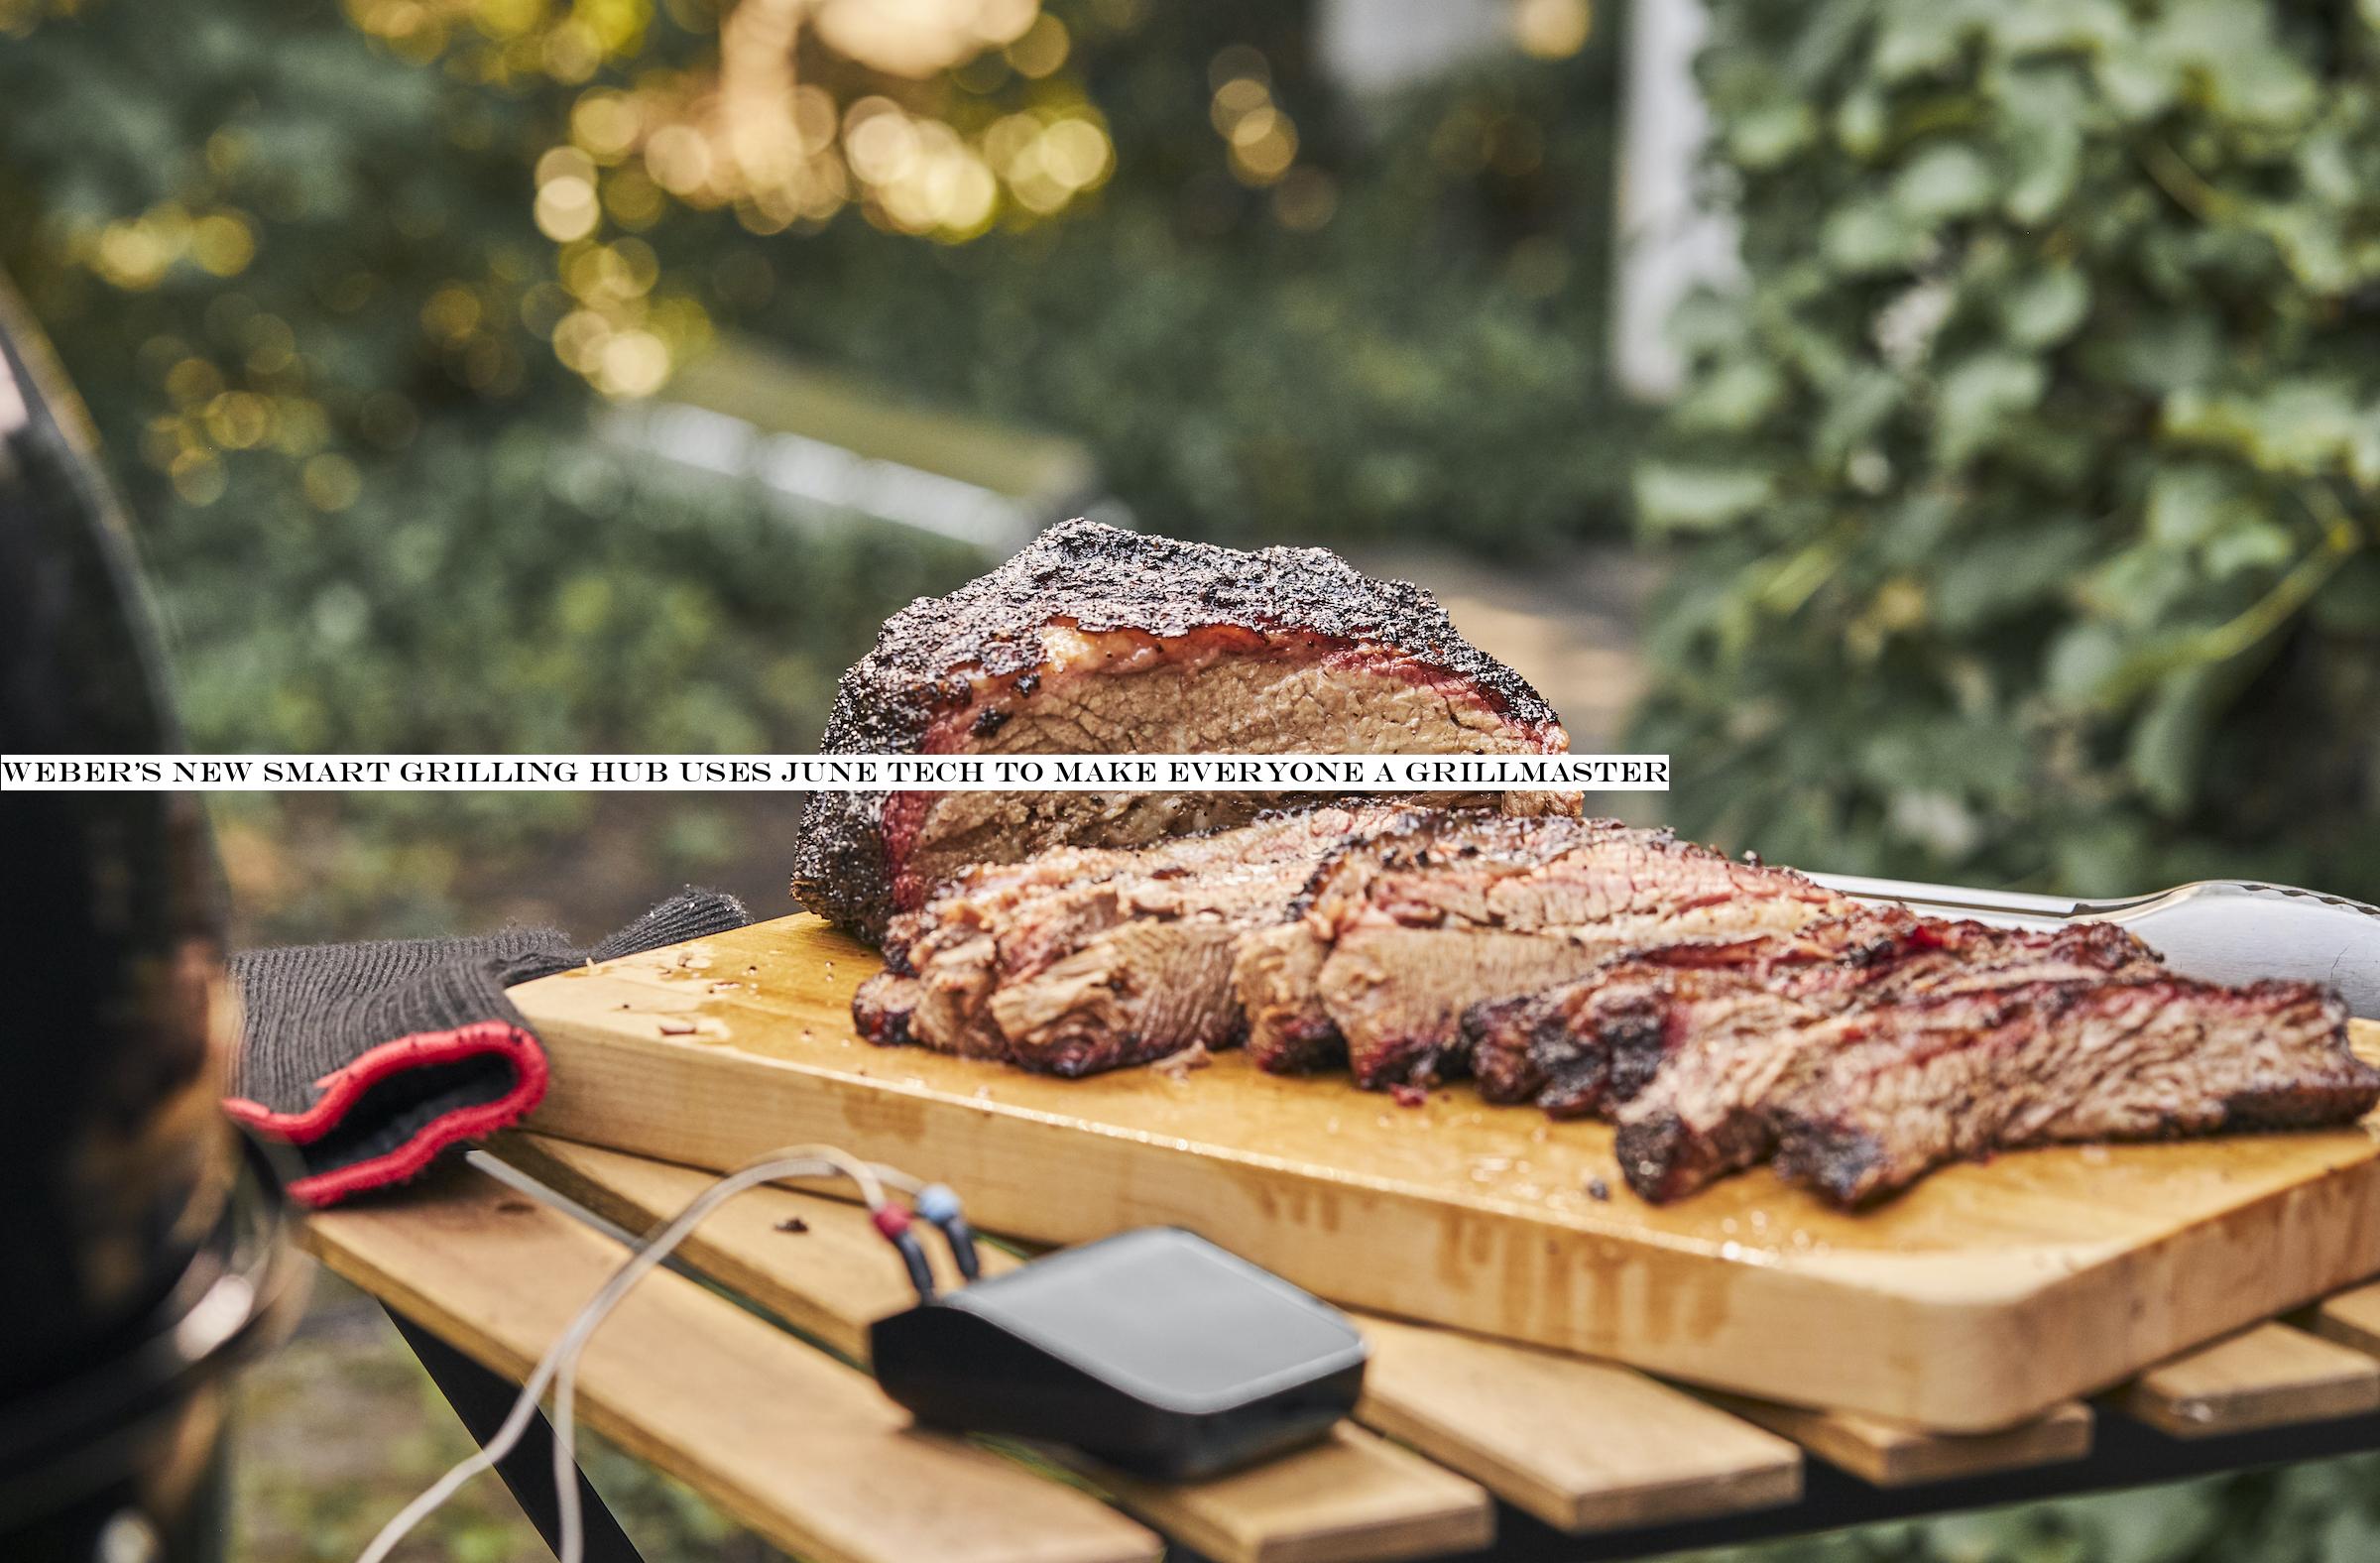 Webernew Smart Grilling Hub uses June tech to make everyone a grillmaster